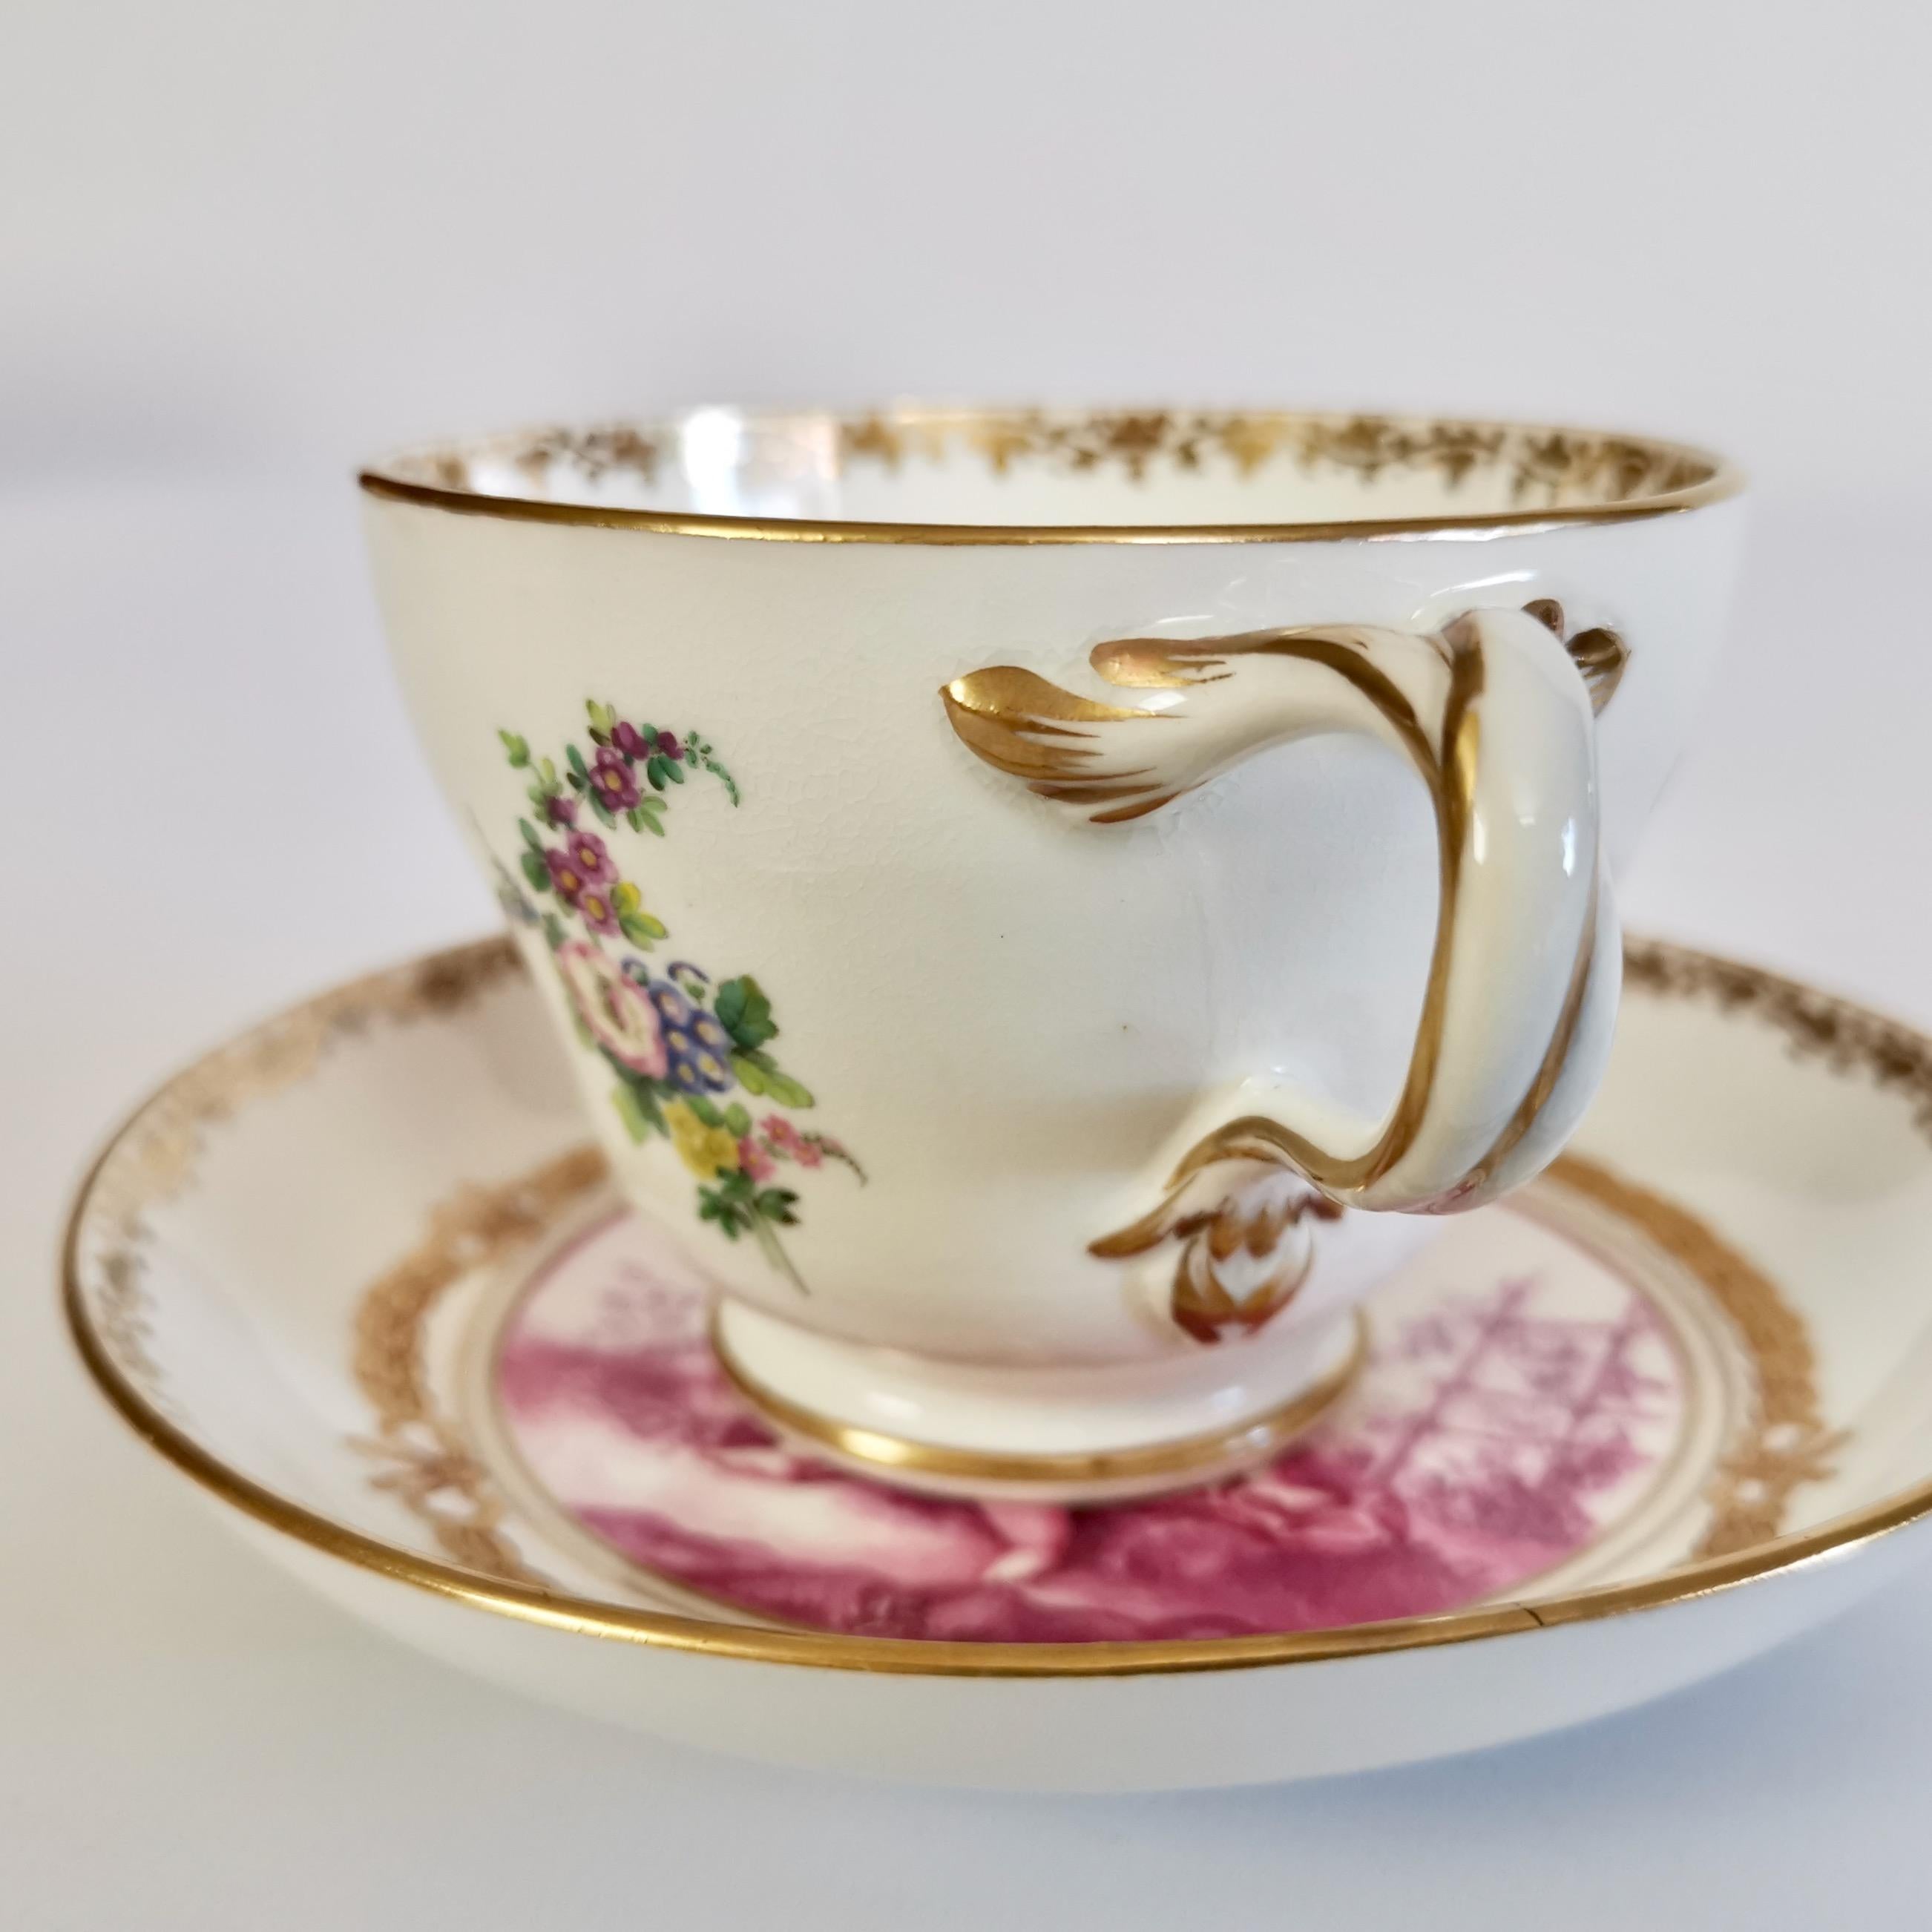 Mid-19th Century Kerr & Binns Worcester Porcelain Cup and Saucer, Puce Putti Playing, circa 1855